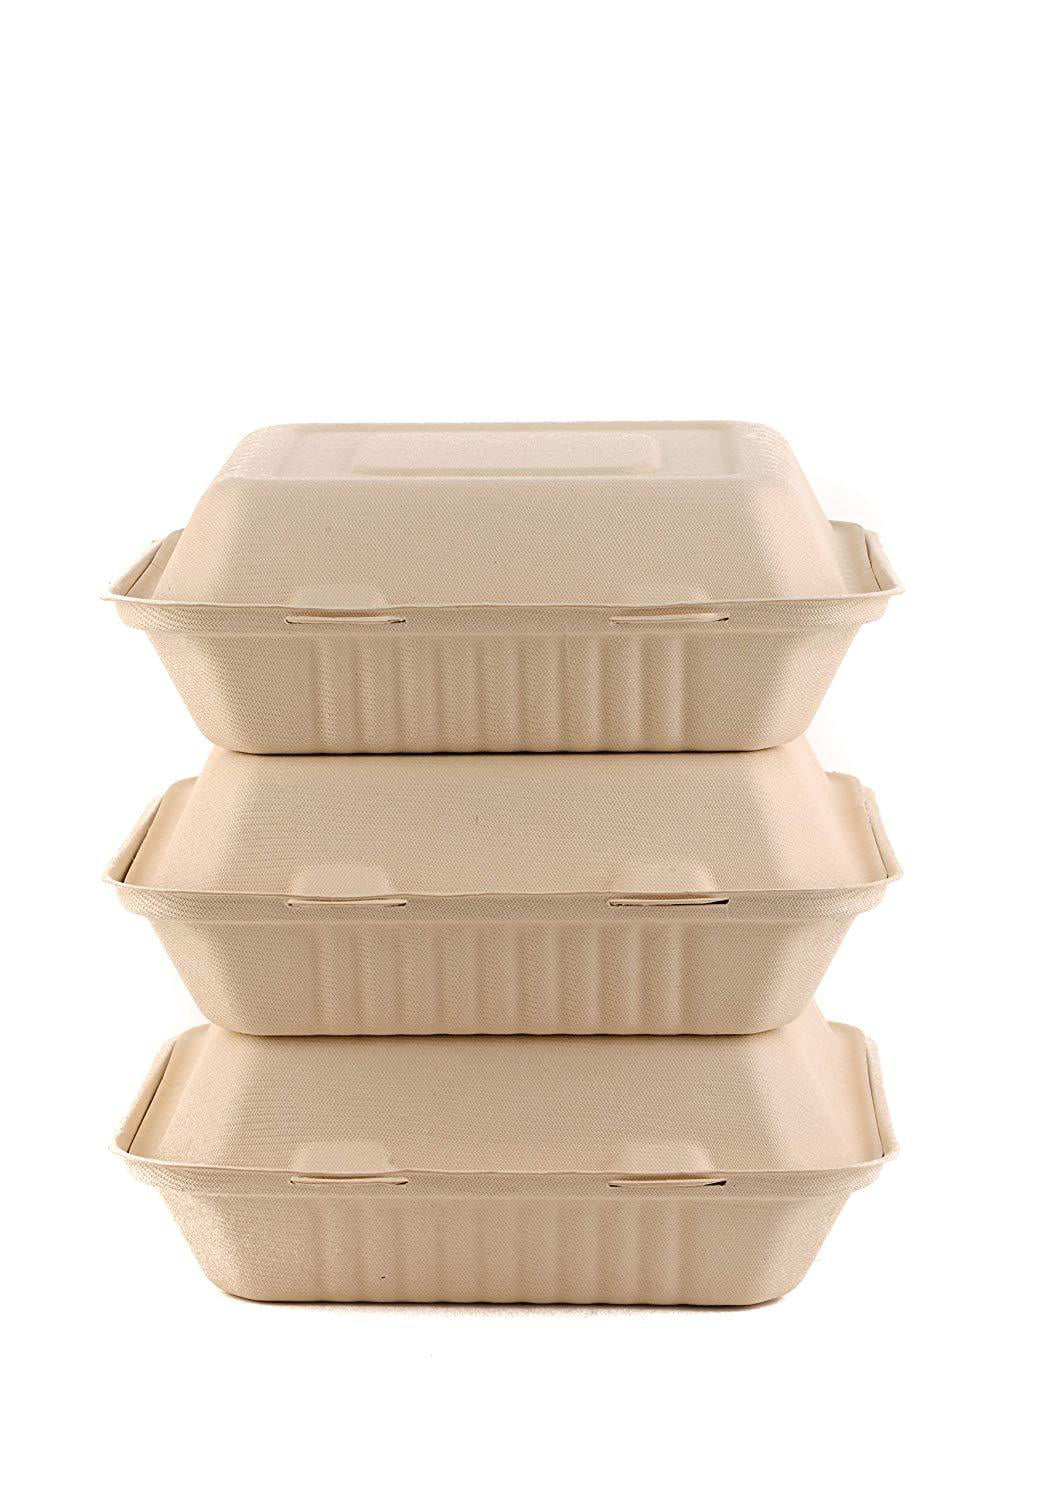 Reusable Takeout Container with 3-Compartments by Hubert® - Green